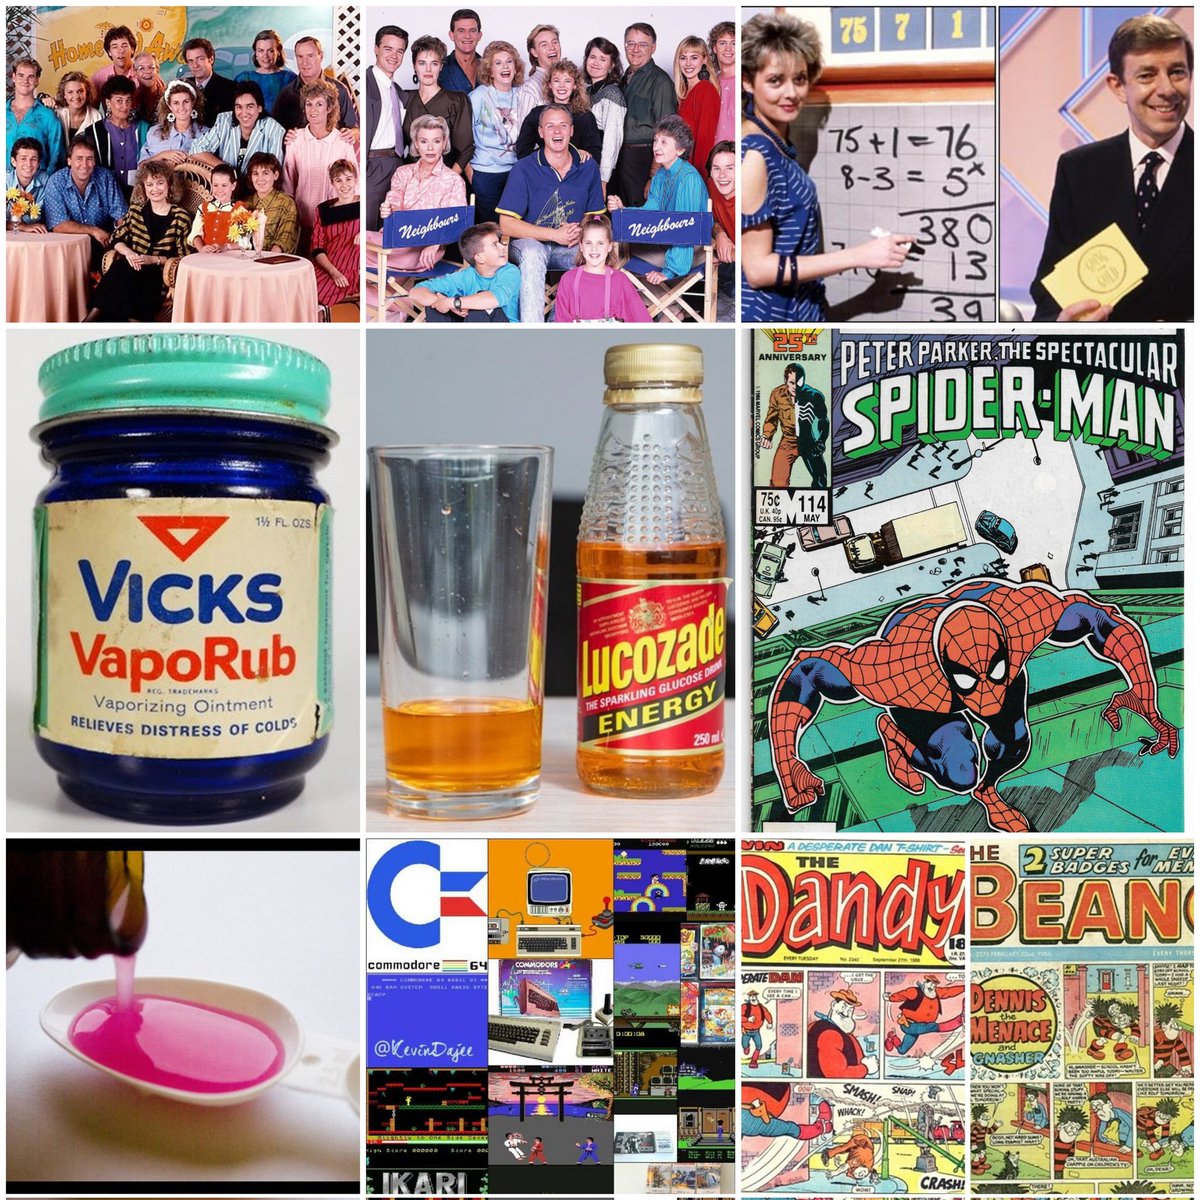 Memories as a child of the 1980s in the UK.... When you were off school and unwell these things made me better.... #Lucozade #vicks #neighbours #homeandaway #countdown #goingforgold #calpol #comics #SpiderMan #dandy #beano #c64 #retrogaming #80s #retro